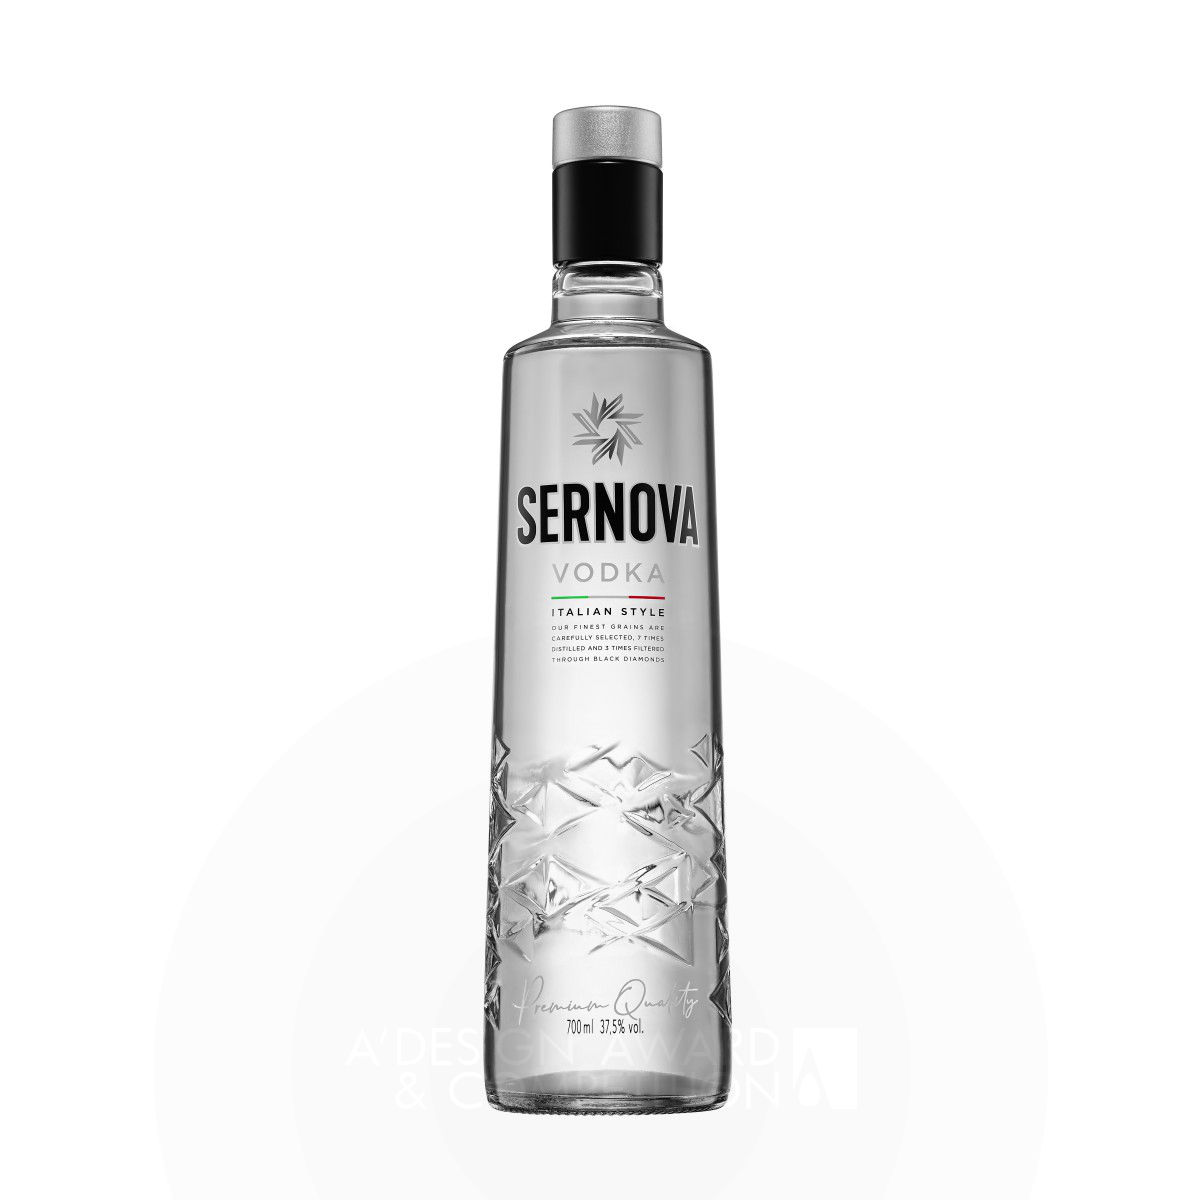 Sernova Vodka Packaging and Graphic by Tridimage Silver Packaging Design Award Winner 2022 